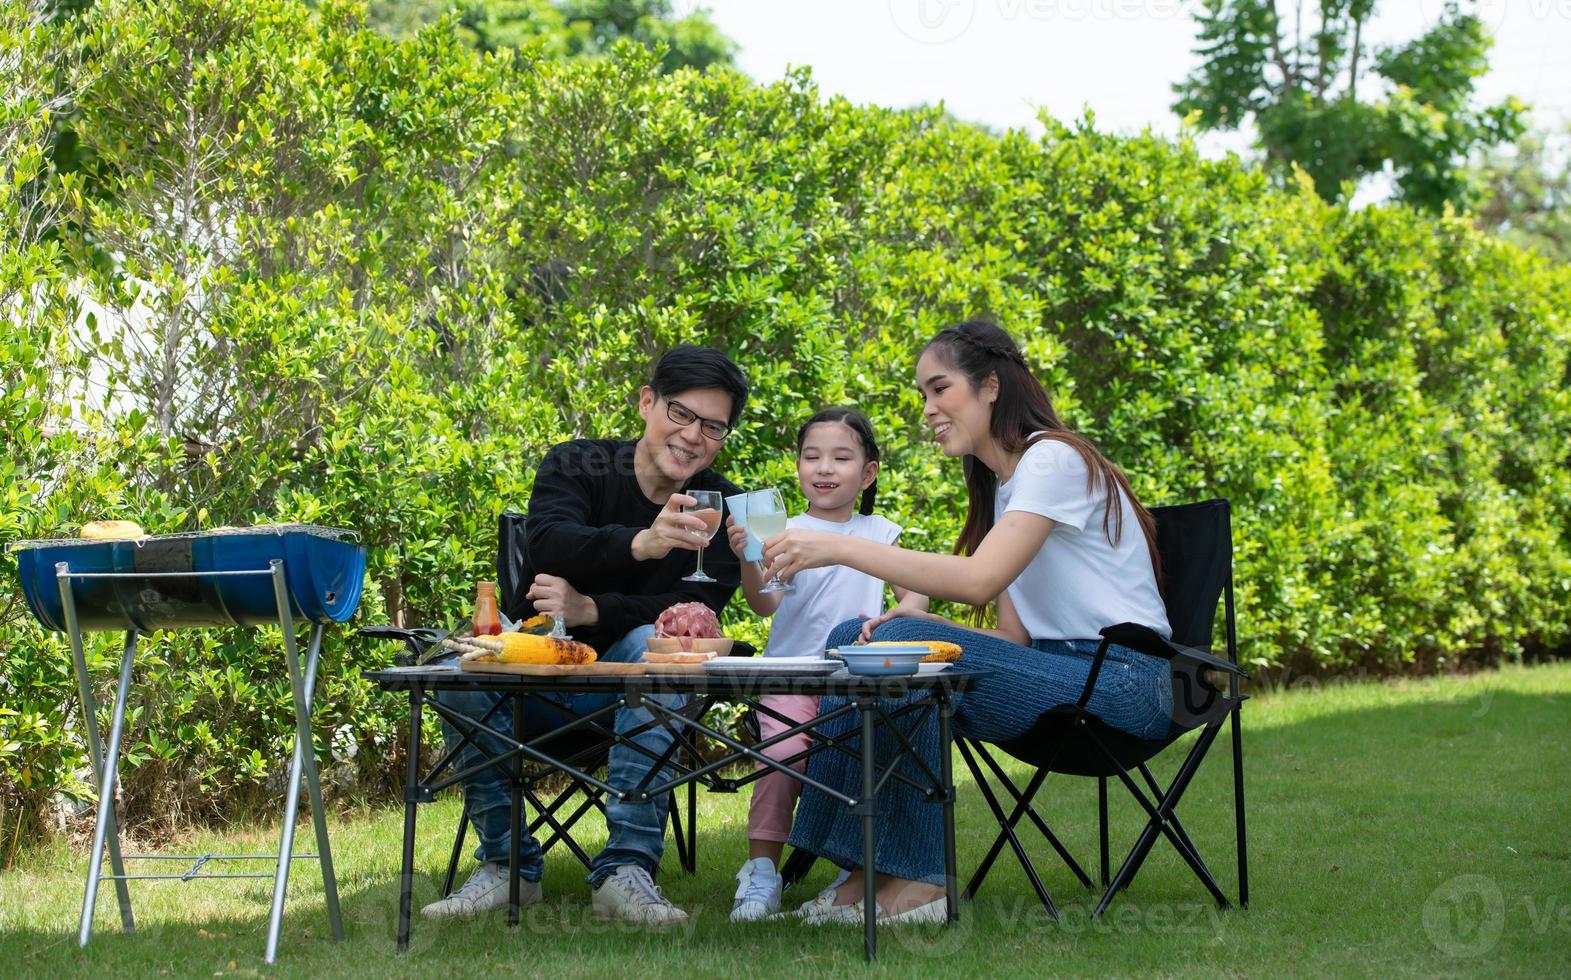 Family holiday activities include father, mother and children with camping barbecue and play in the yard together happily on vacation. photo